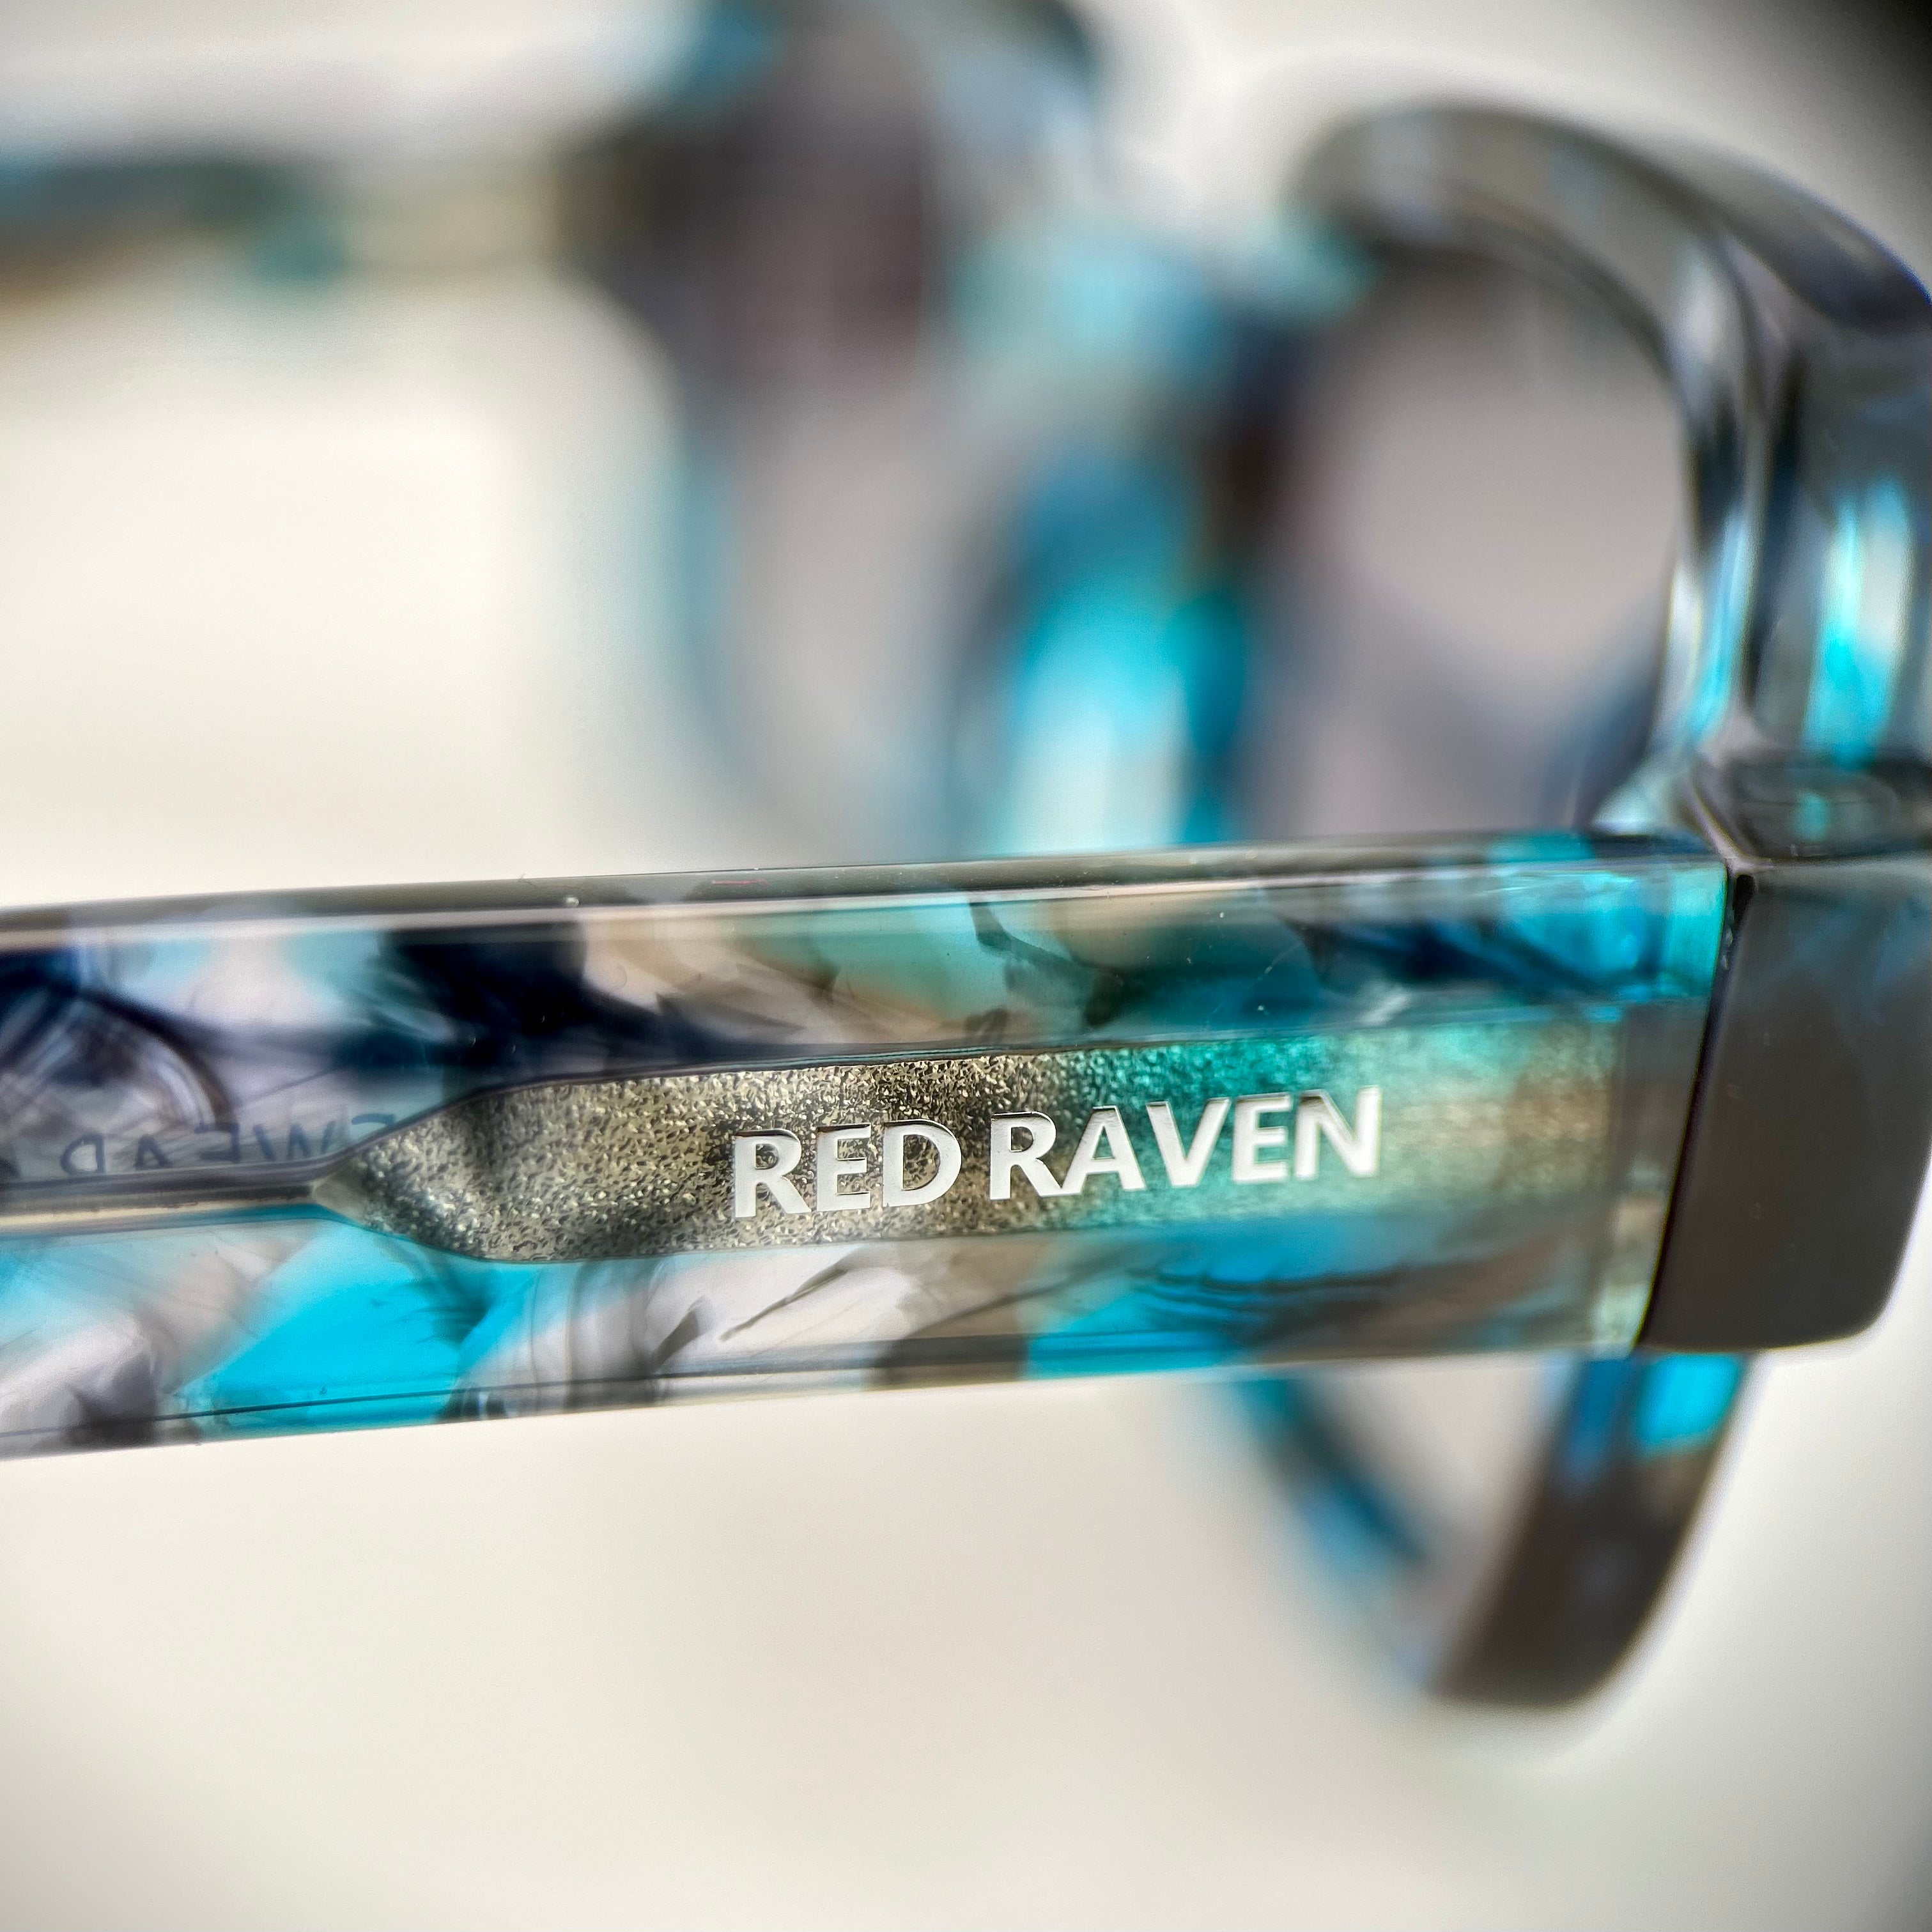 BEVERLY FLORAL COLLECTOR'S EDITION - Red Raven